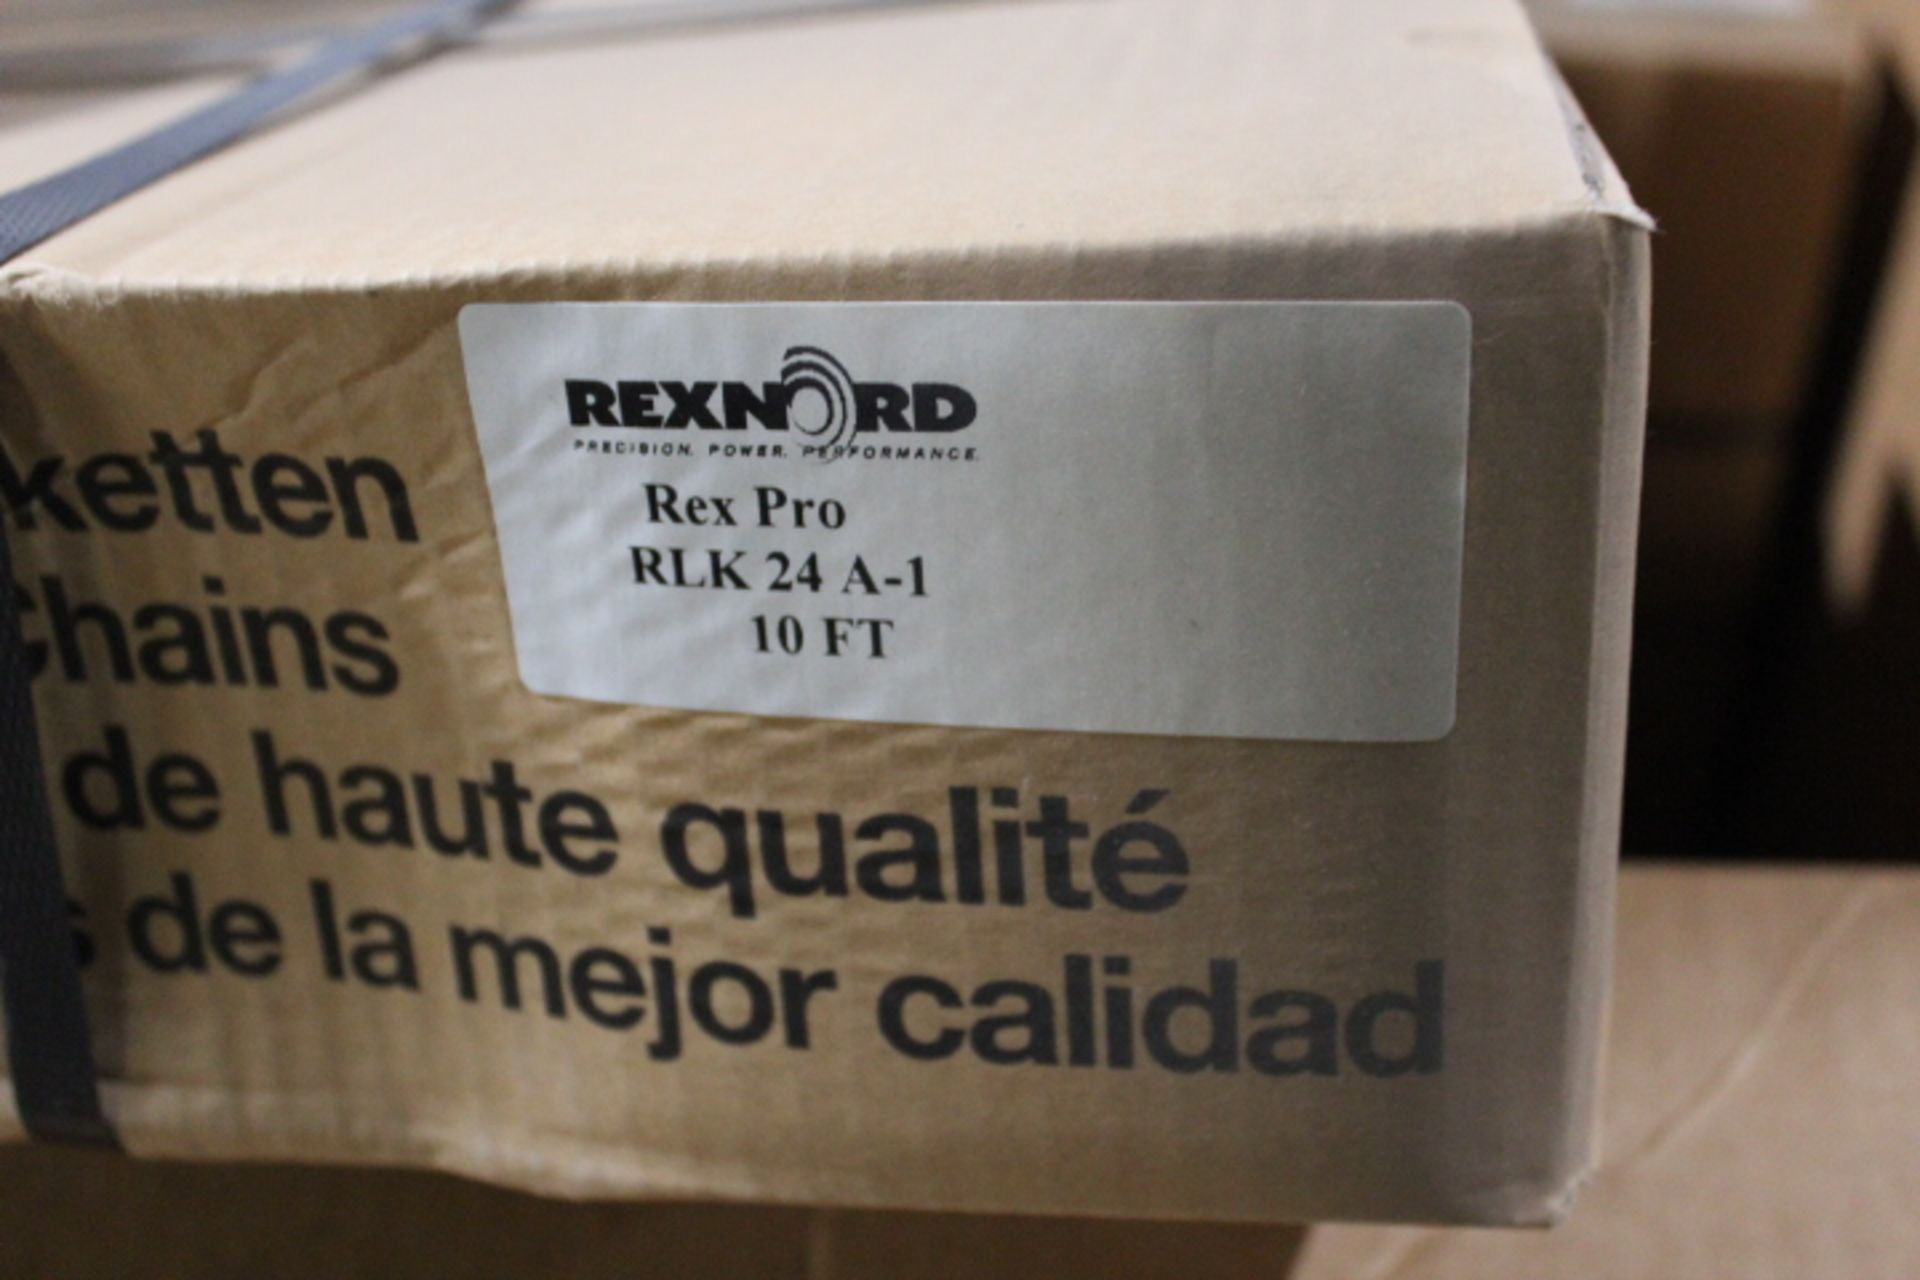 1 LOT, SKID OF NEW REX PRO RLK-24 A-1 10FT CHAINS 14 PCS - Image 3 of 6